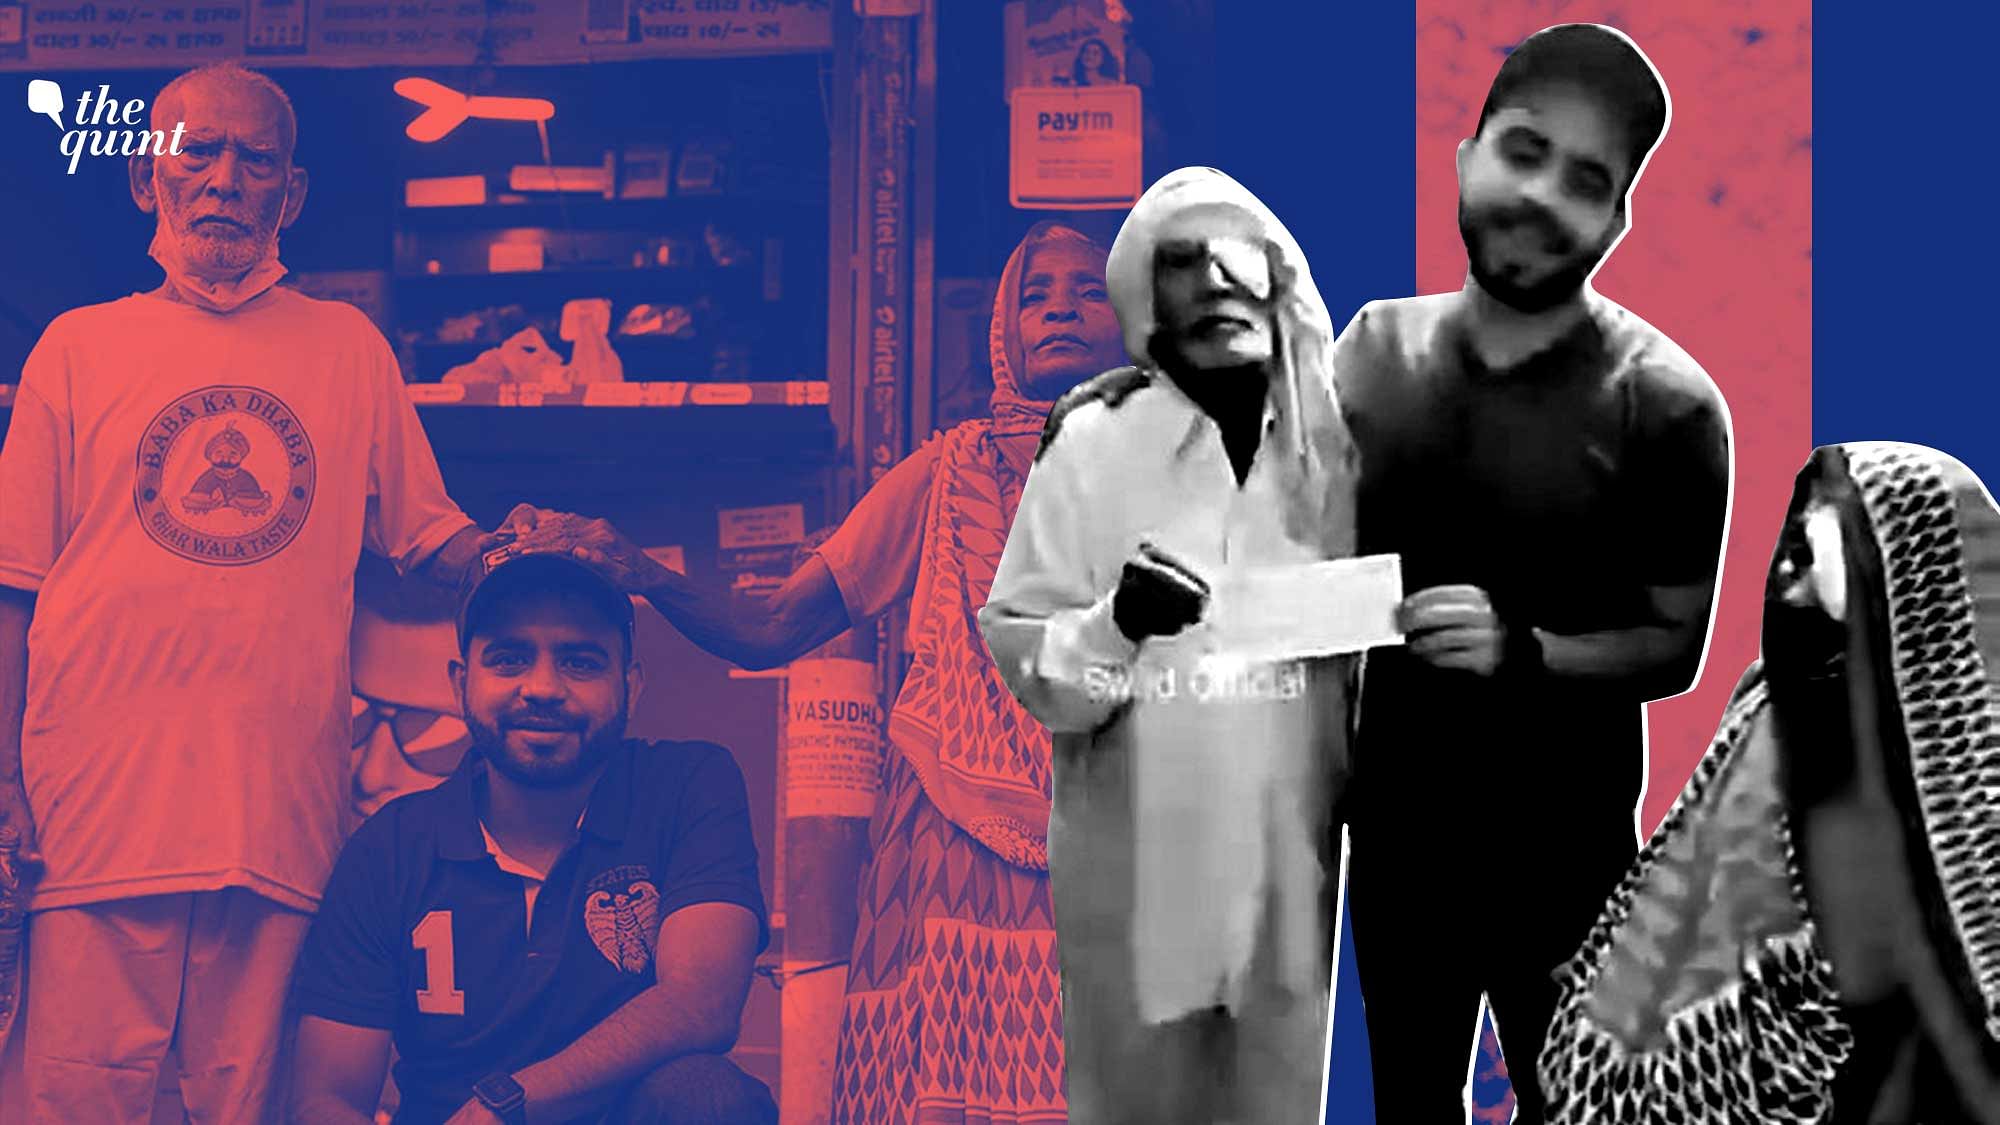 Gaurav Wasan, the food blogger behind the viral ‘Baba ka Dhaba’ video, has been accused of misappropriation of funds.